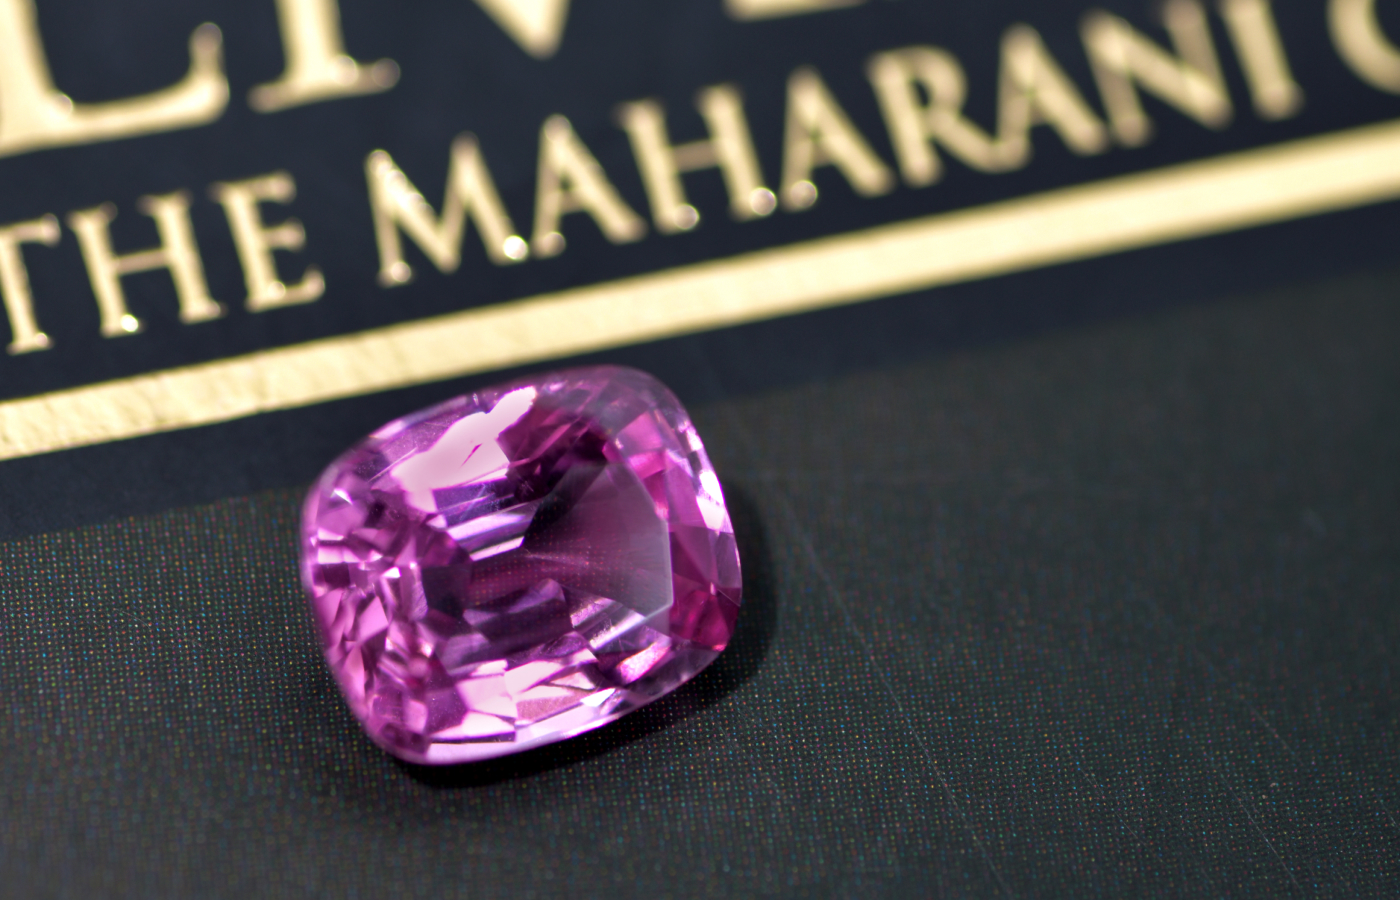 Minehaus presents its clients with exceptional gemstones, including this purplish-pink spinel from Tajikistan weighing more than 7 carats